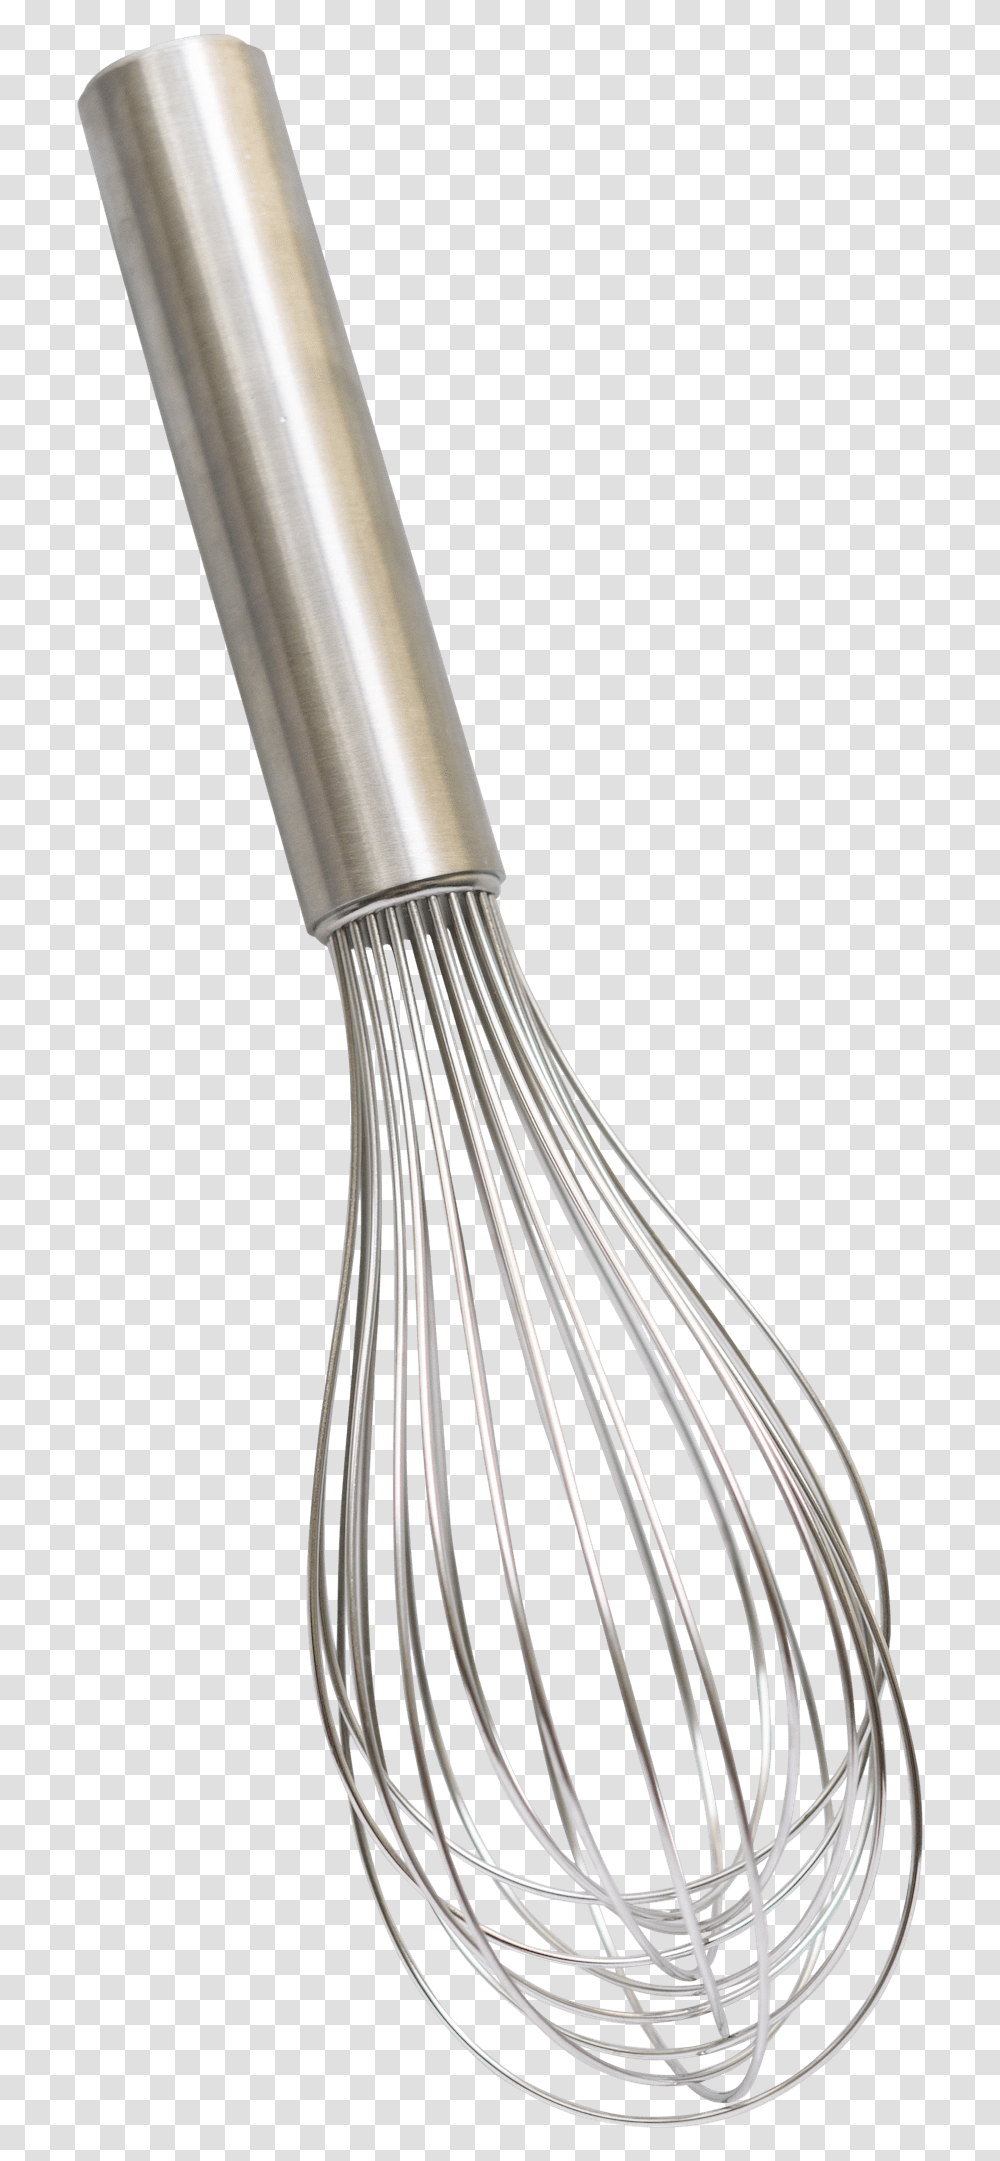 Whisk, Appliance, Mixer Transparent Png